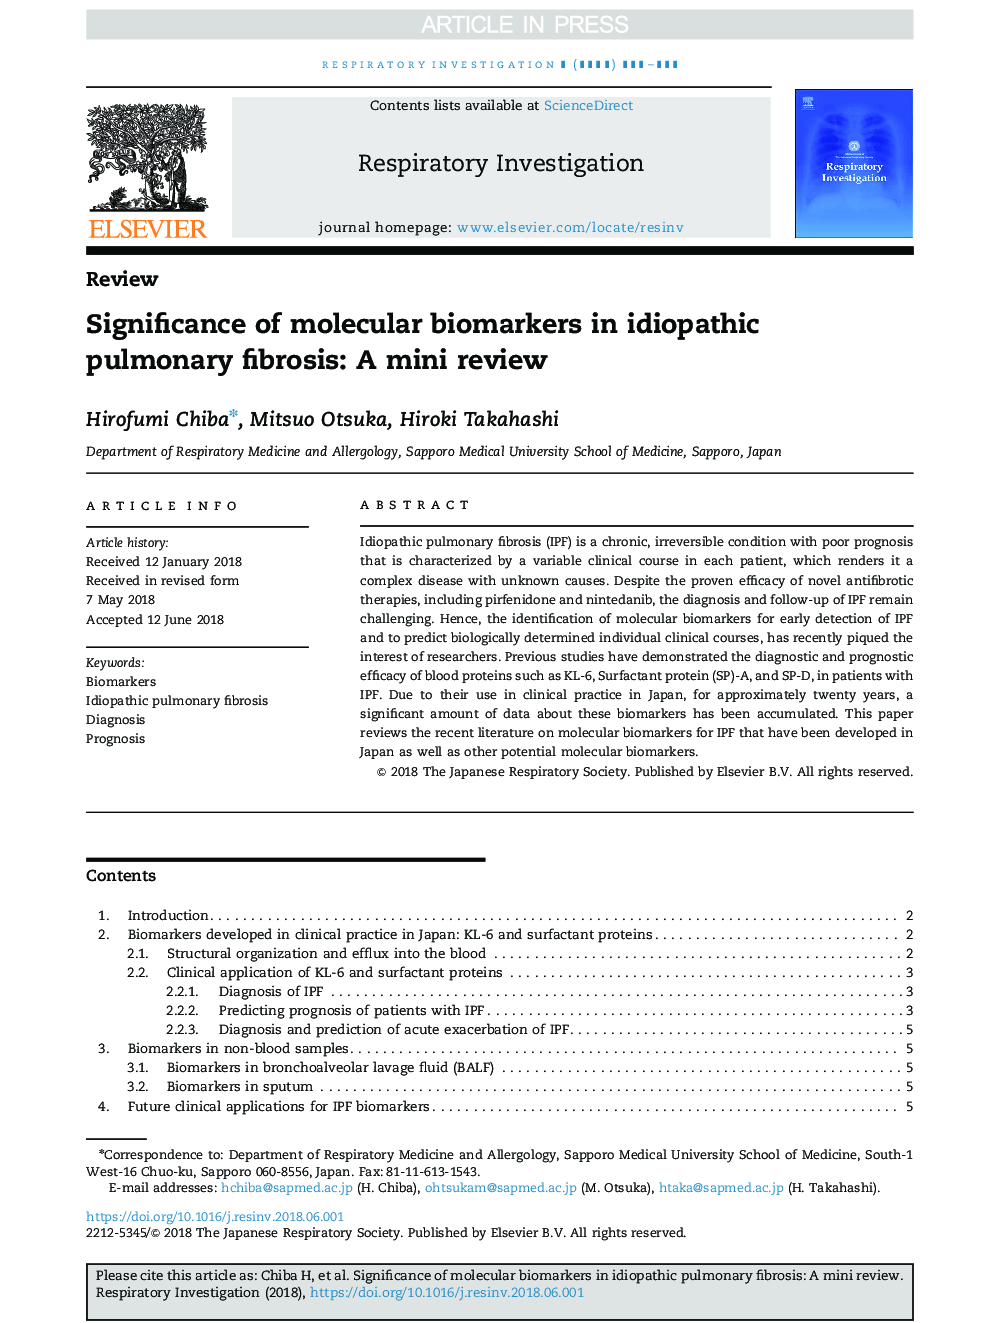 Significance of molecular biomarkers in idiopathic pulmonary fibrosis: A mini review